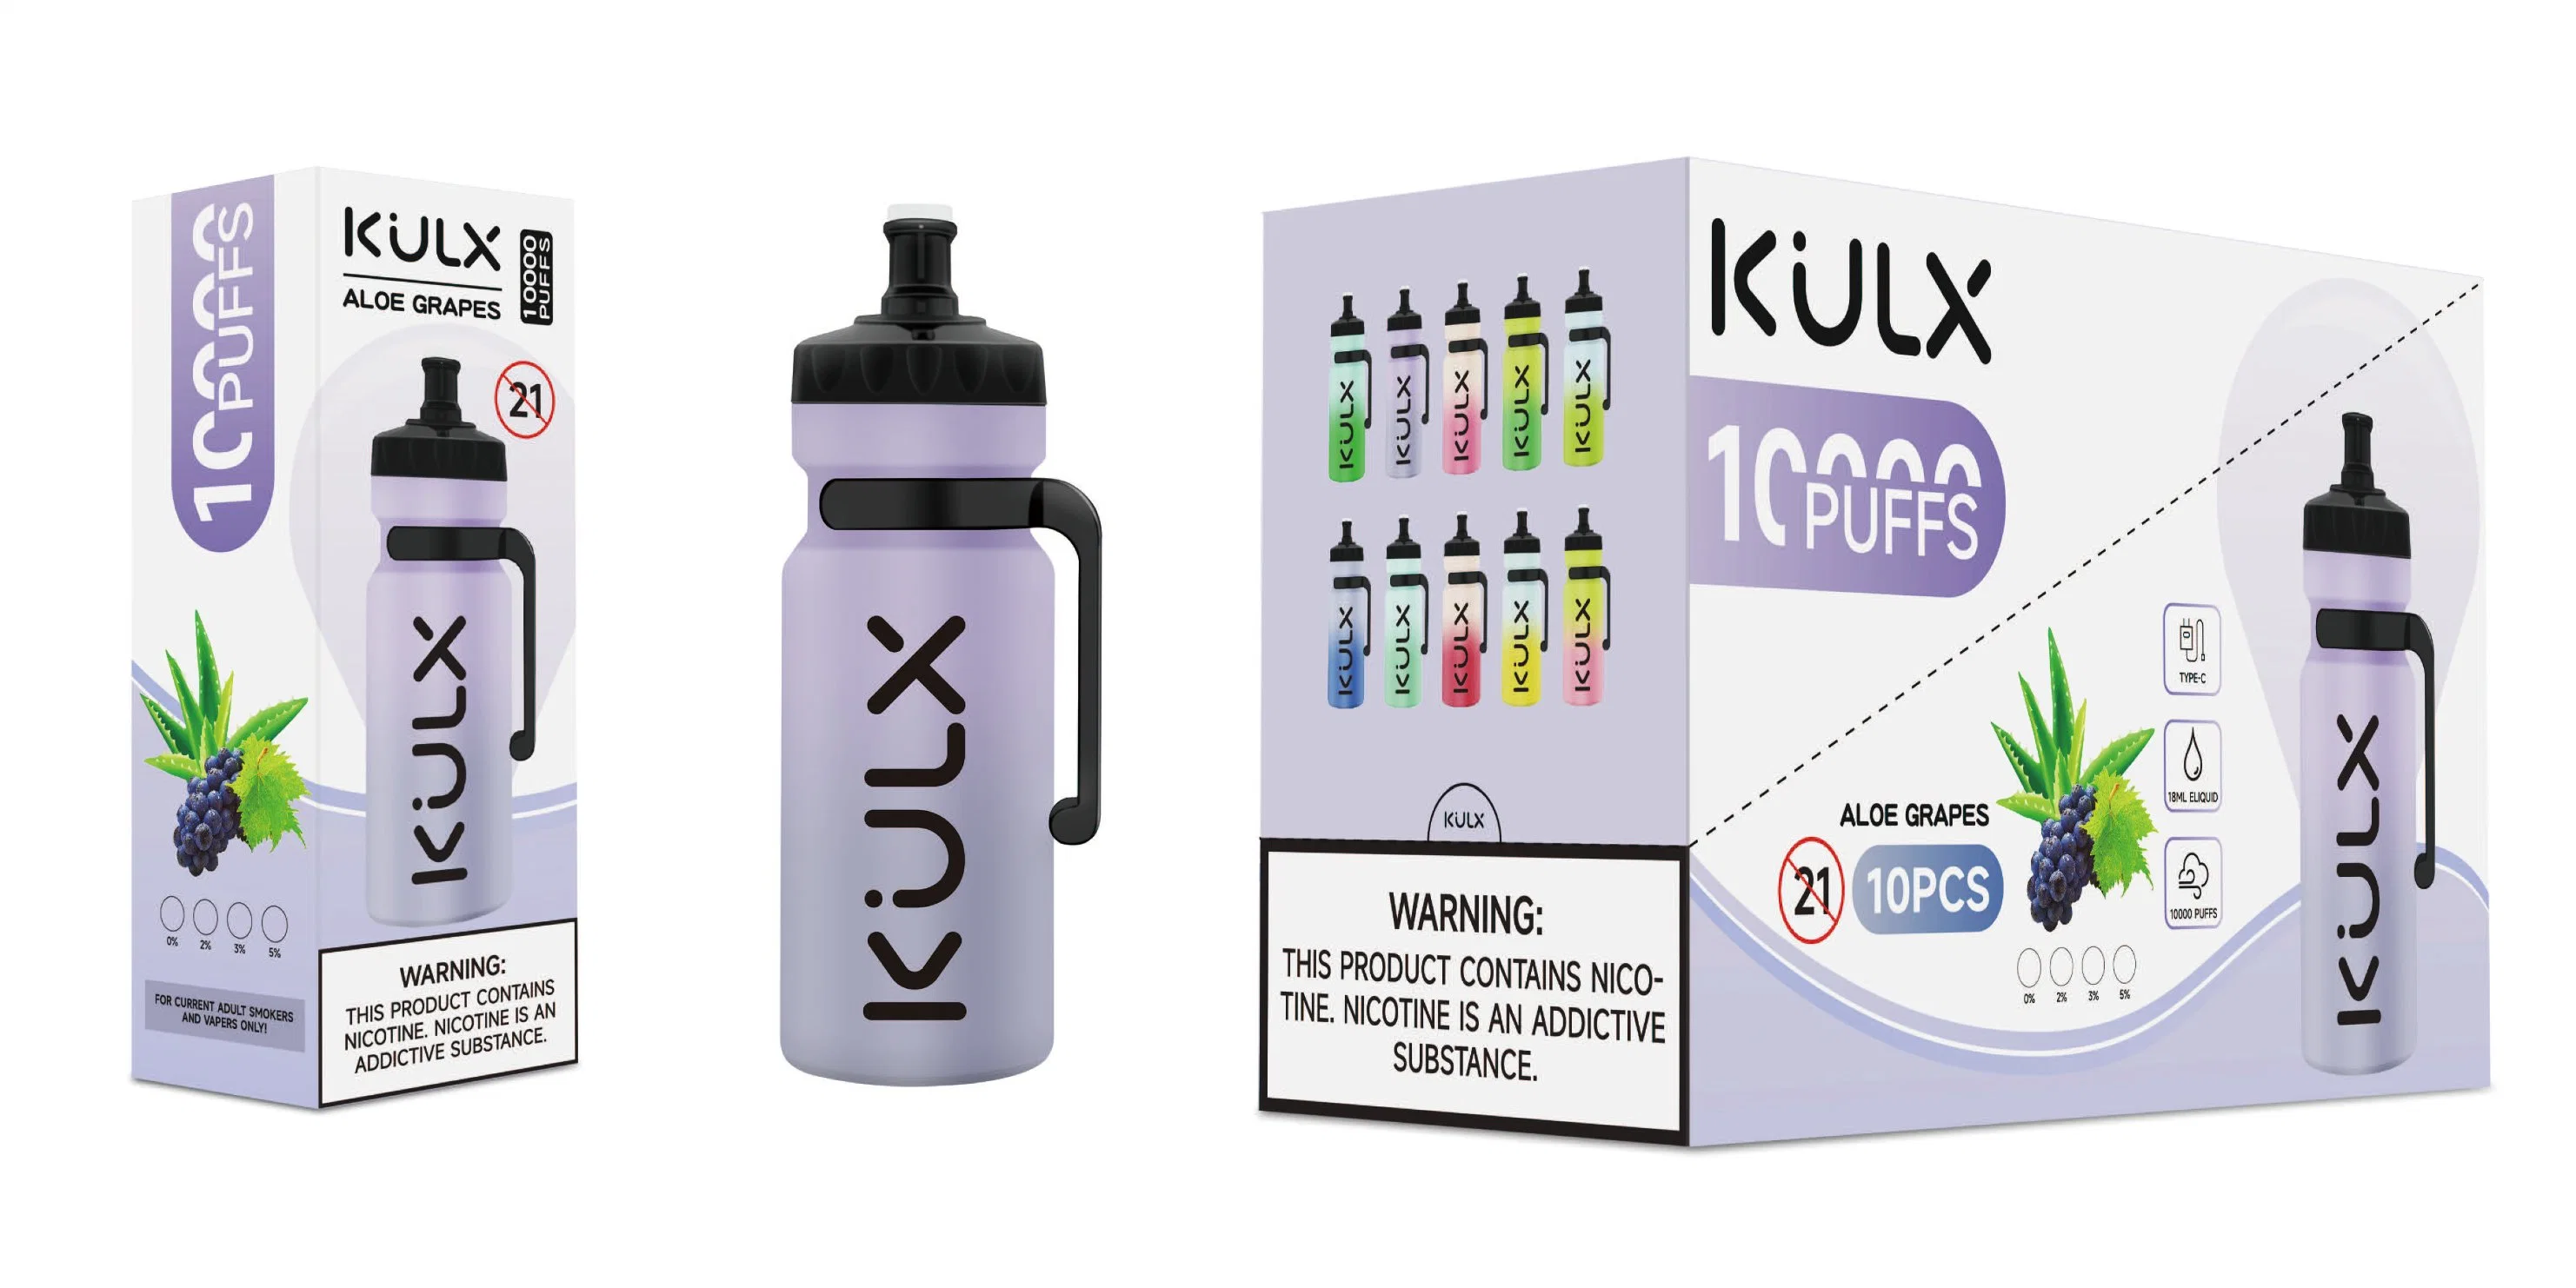 Hot Selling Kulx 8800 9000 10000 Puffs Disposable Vape Elf Puff Bar Electronic Cigarette Vapes Wholesale in Stock